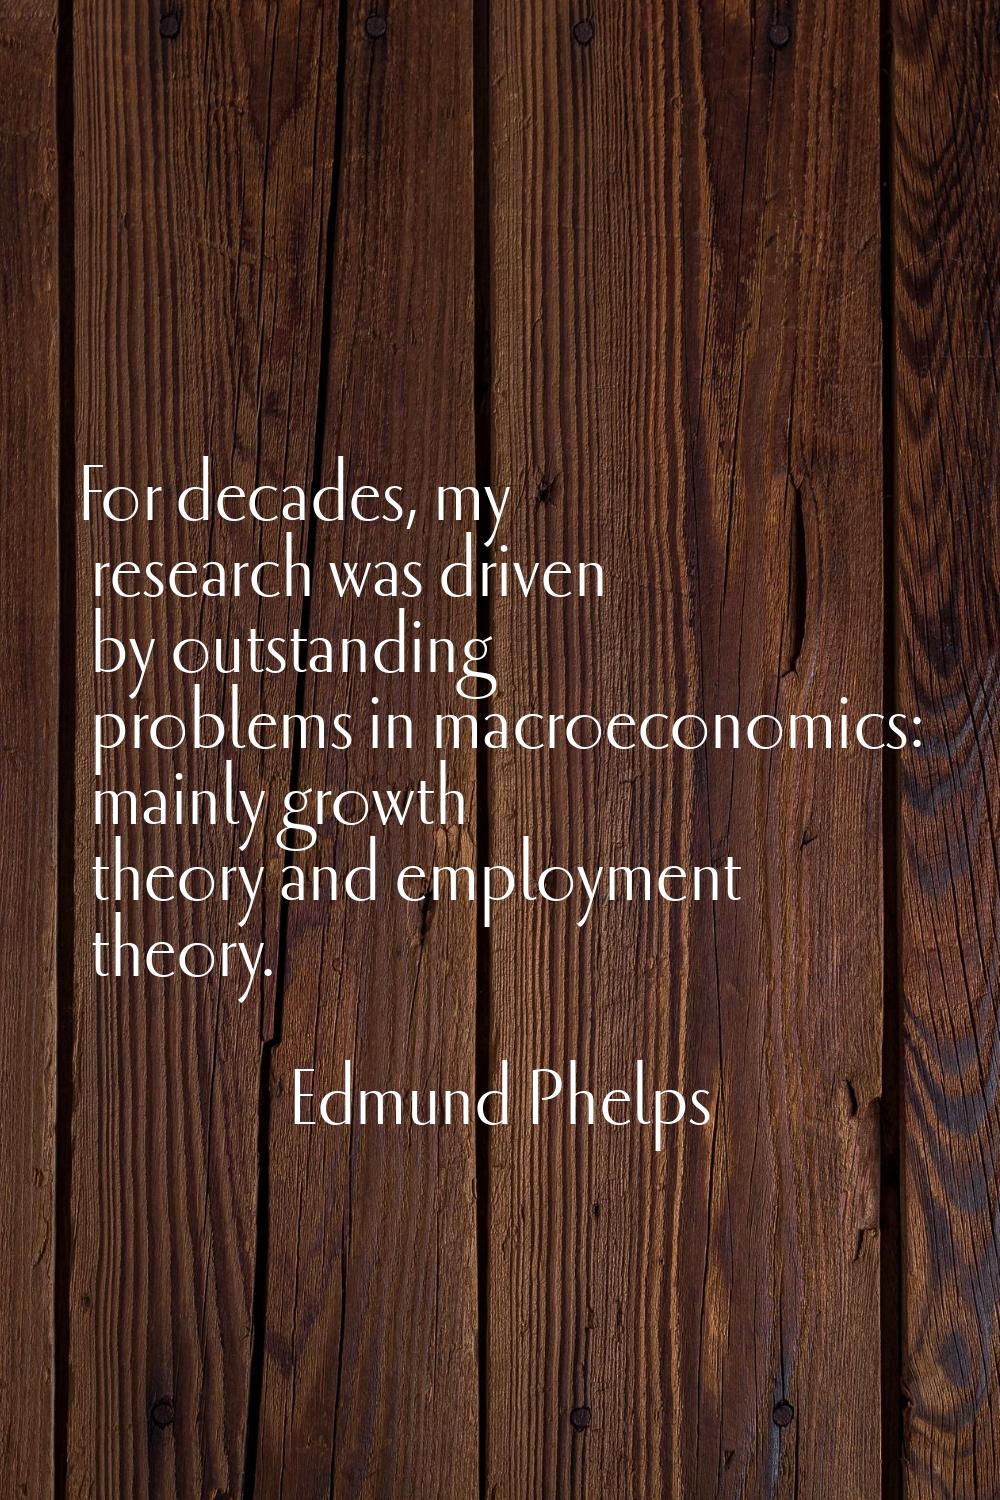 For decades, my research was driven by outstanding problems in macroeconomics: mainly growth theory